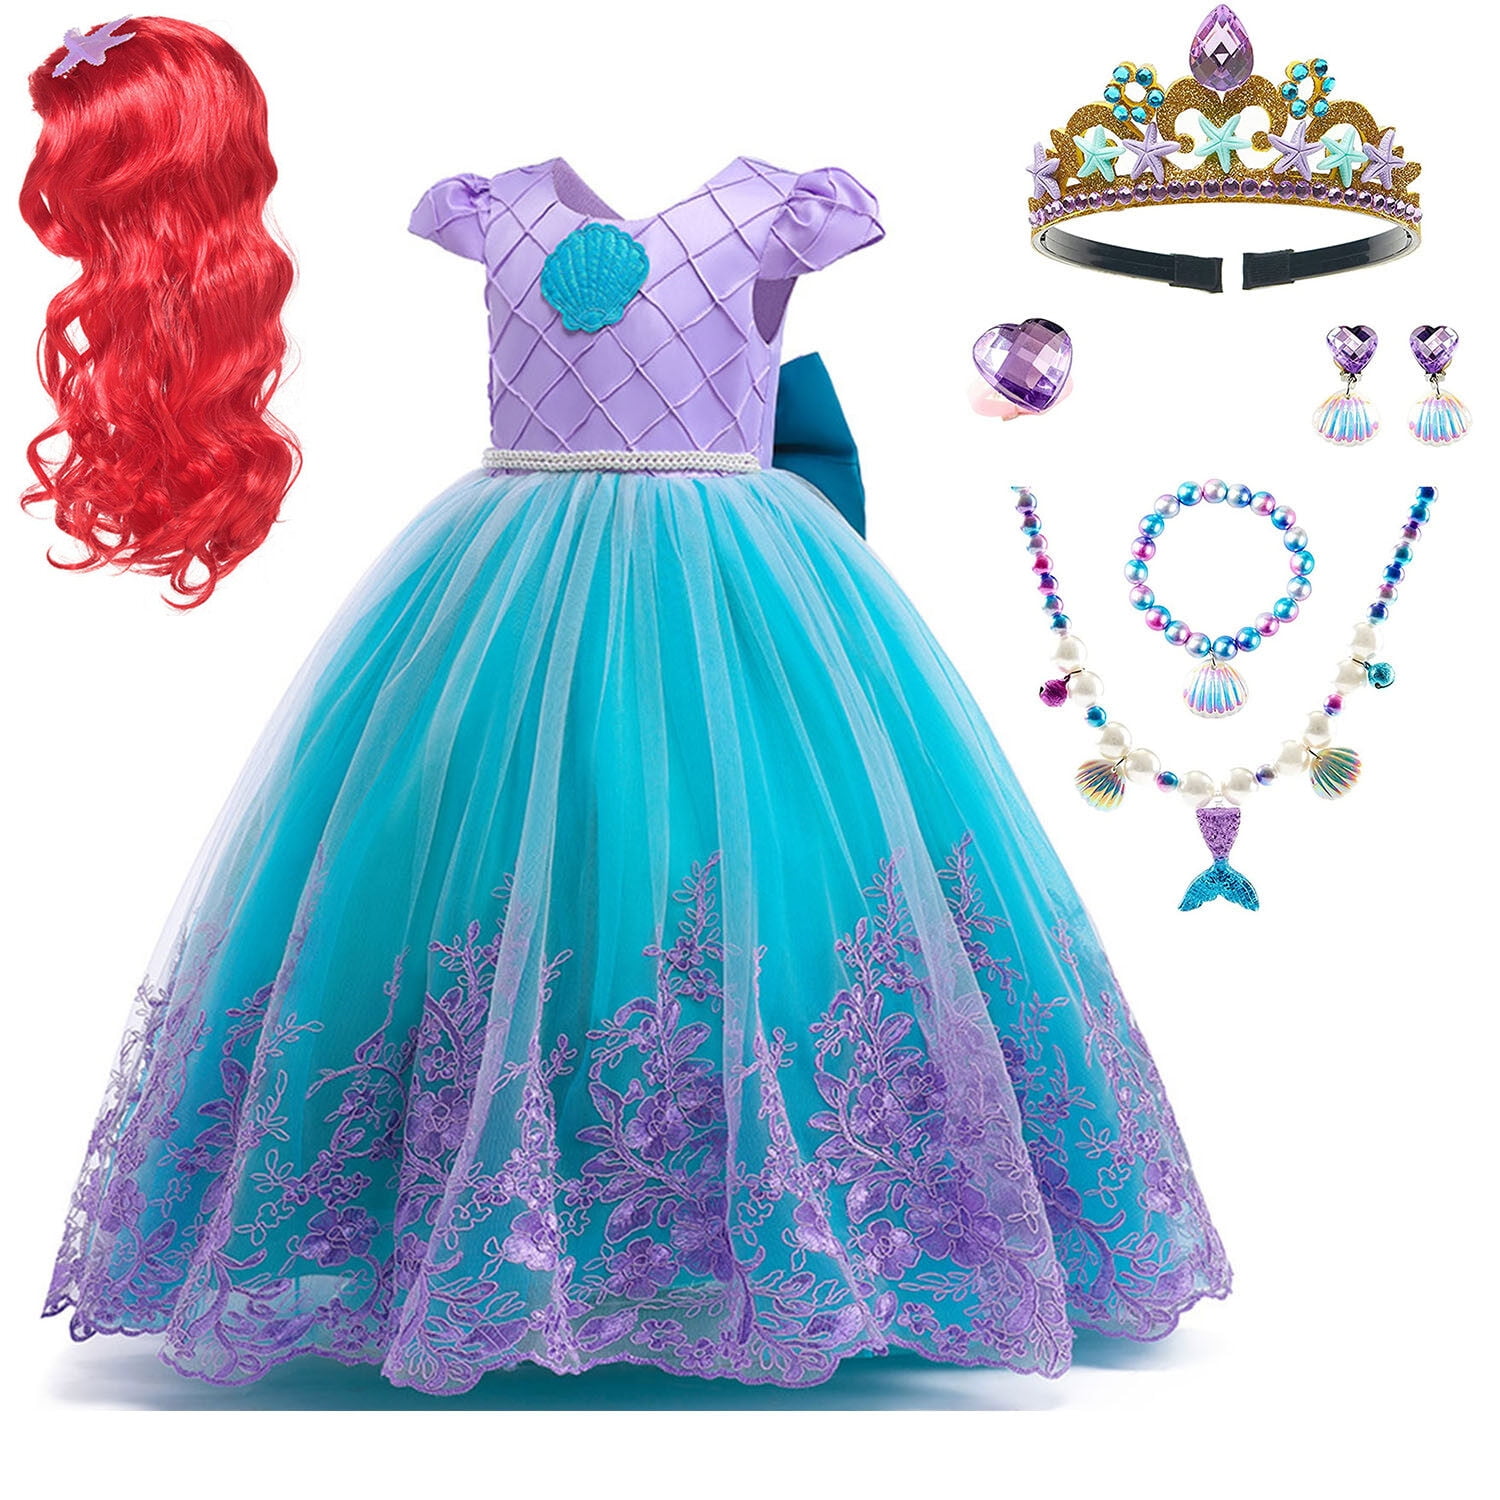 Dive into adventure with Ariel's little mermaid Disney-Inspired dress